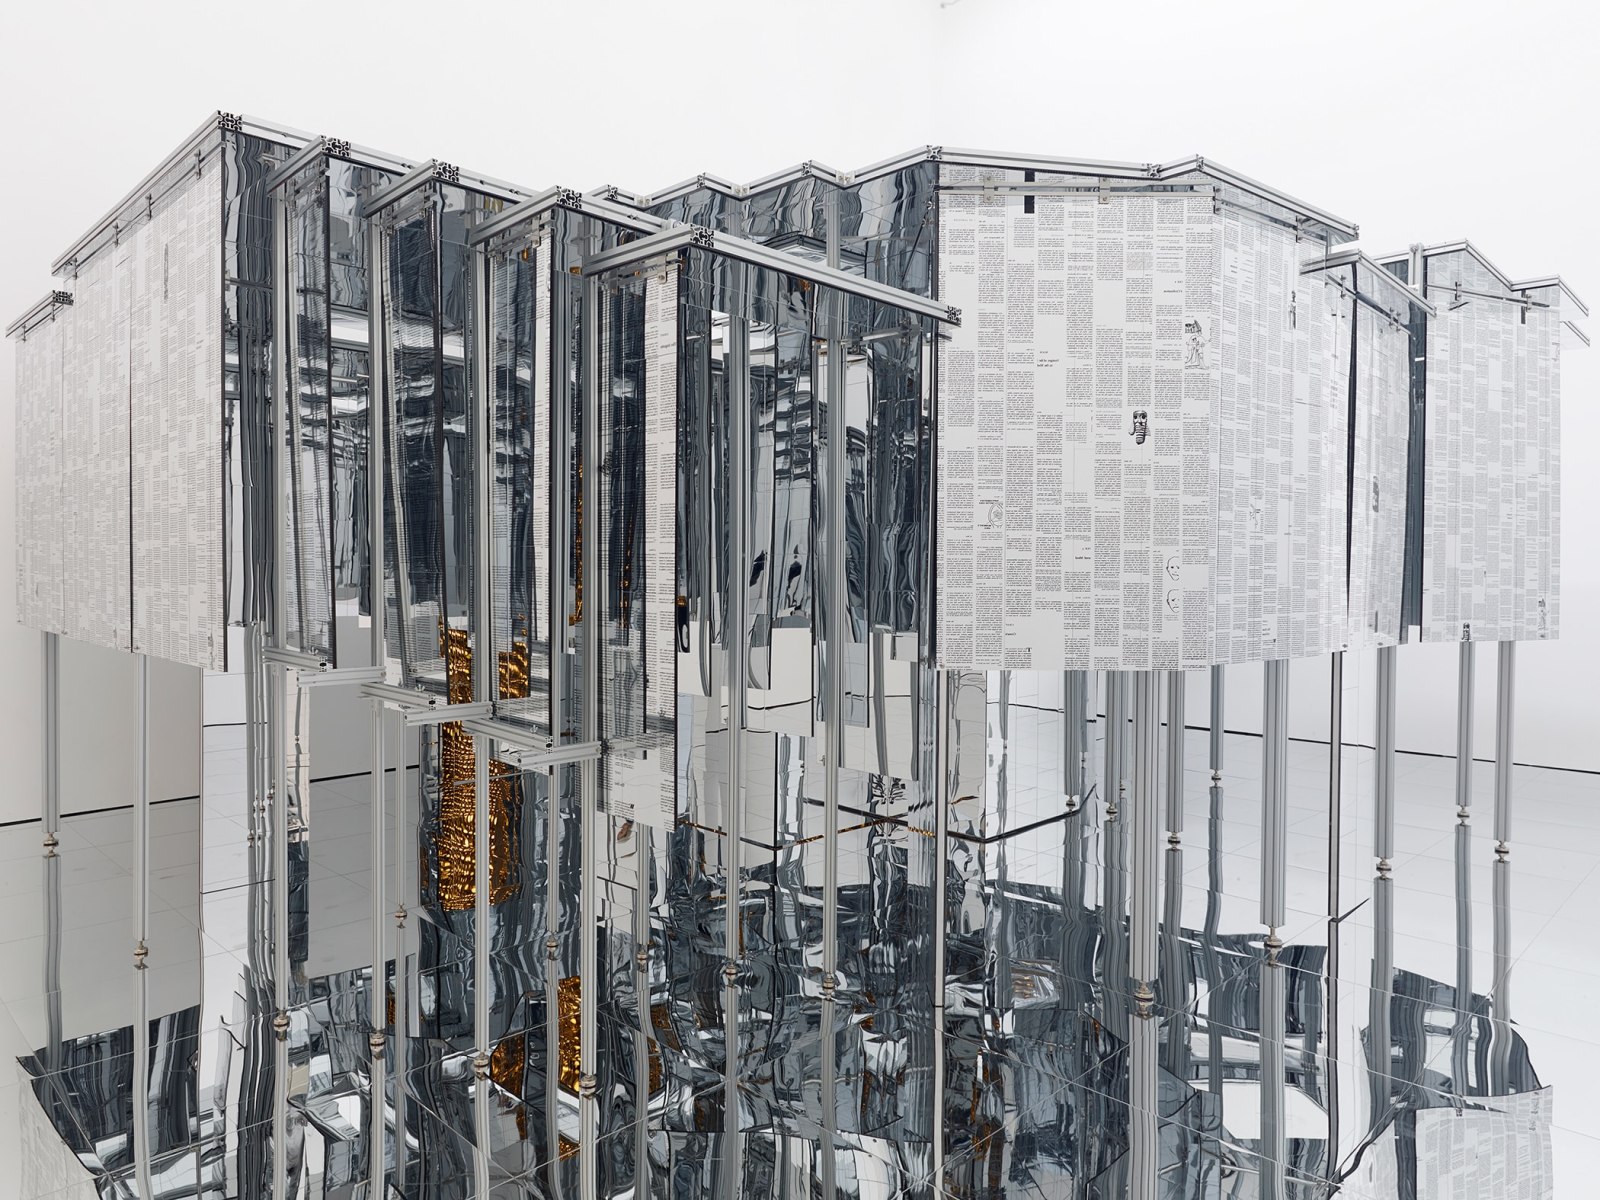 LEE BUL, Willing To Be Vulnerable, 2015&ndash;2016